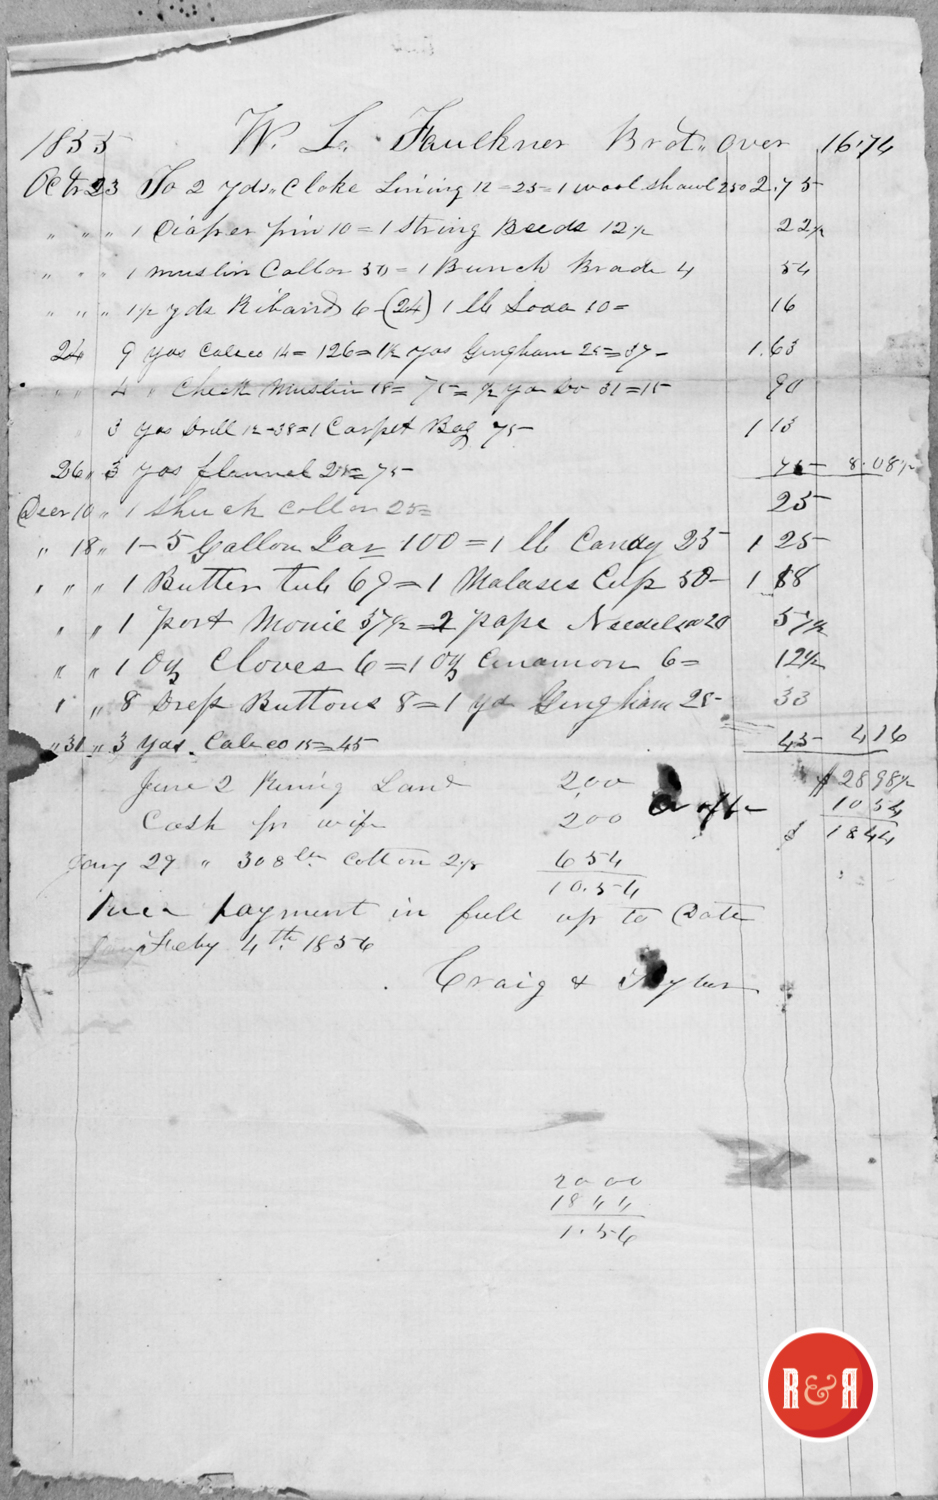 LEDGER FROM CRAIG AND TAYLOR - 1860, p. 6